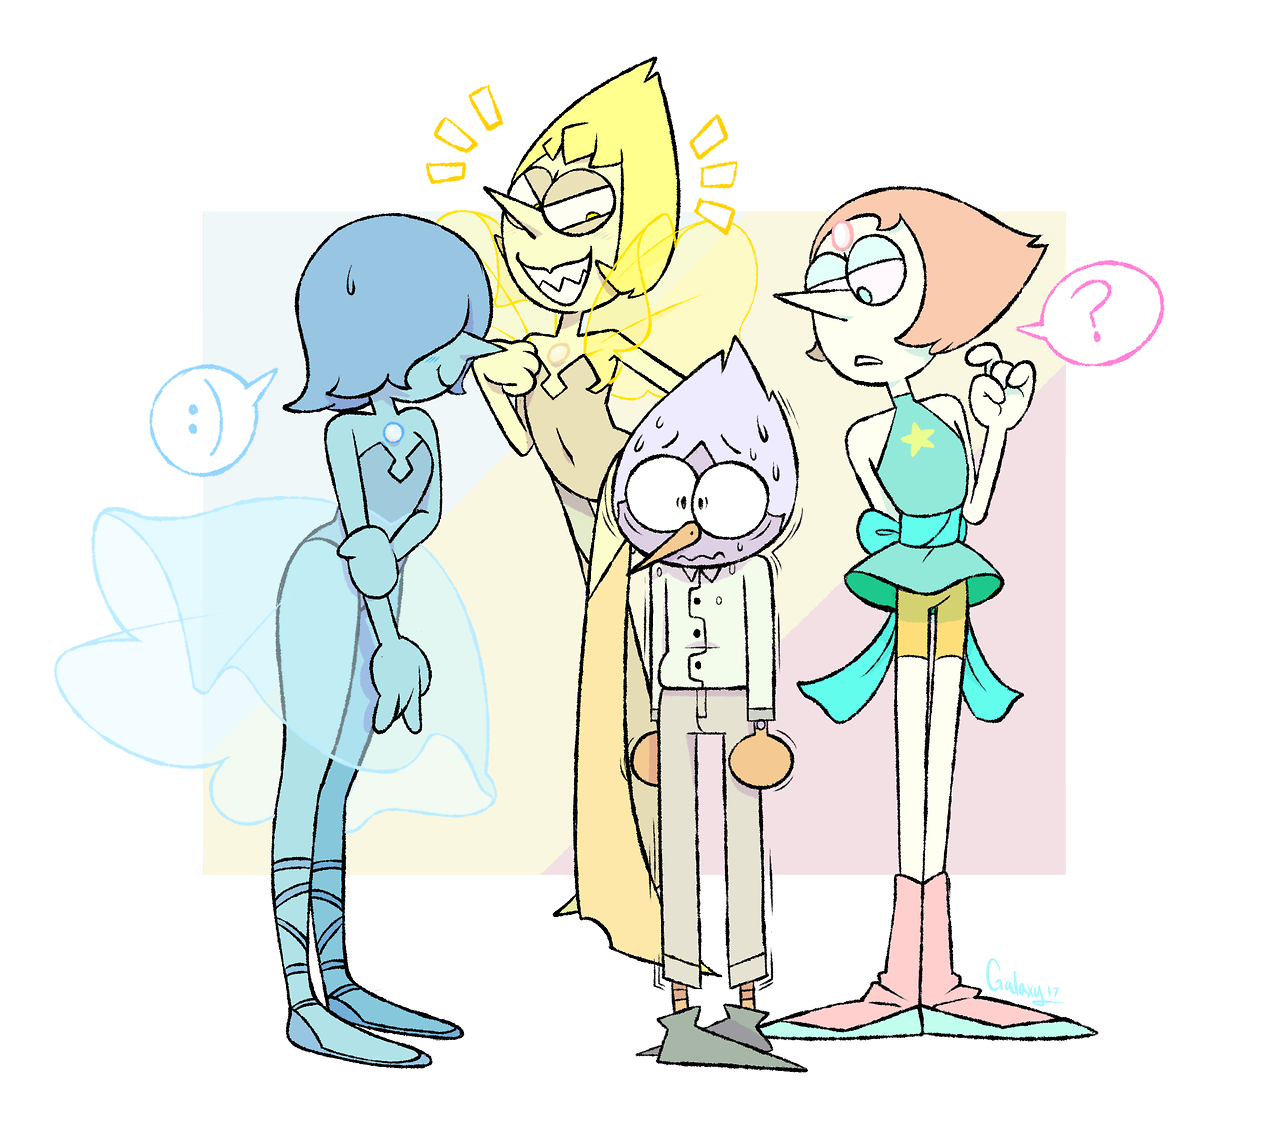 I know I’ve posted these pearls already, but they were actually a part of this larger picture. Everyone mistakes Pird from OK K.O. as a Pearl reference and I ended up drawing this in response